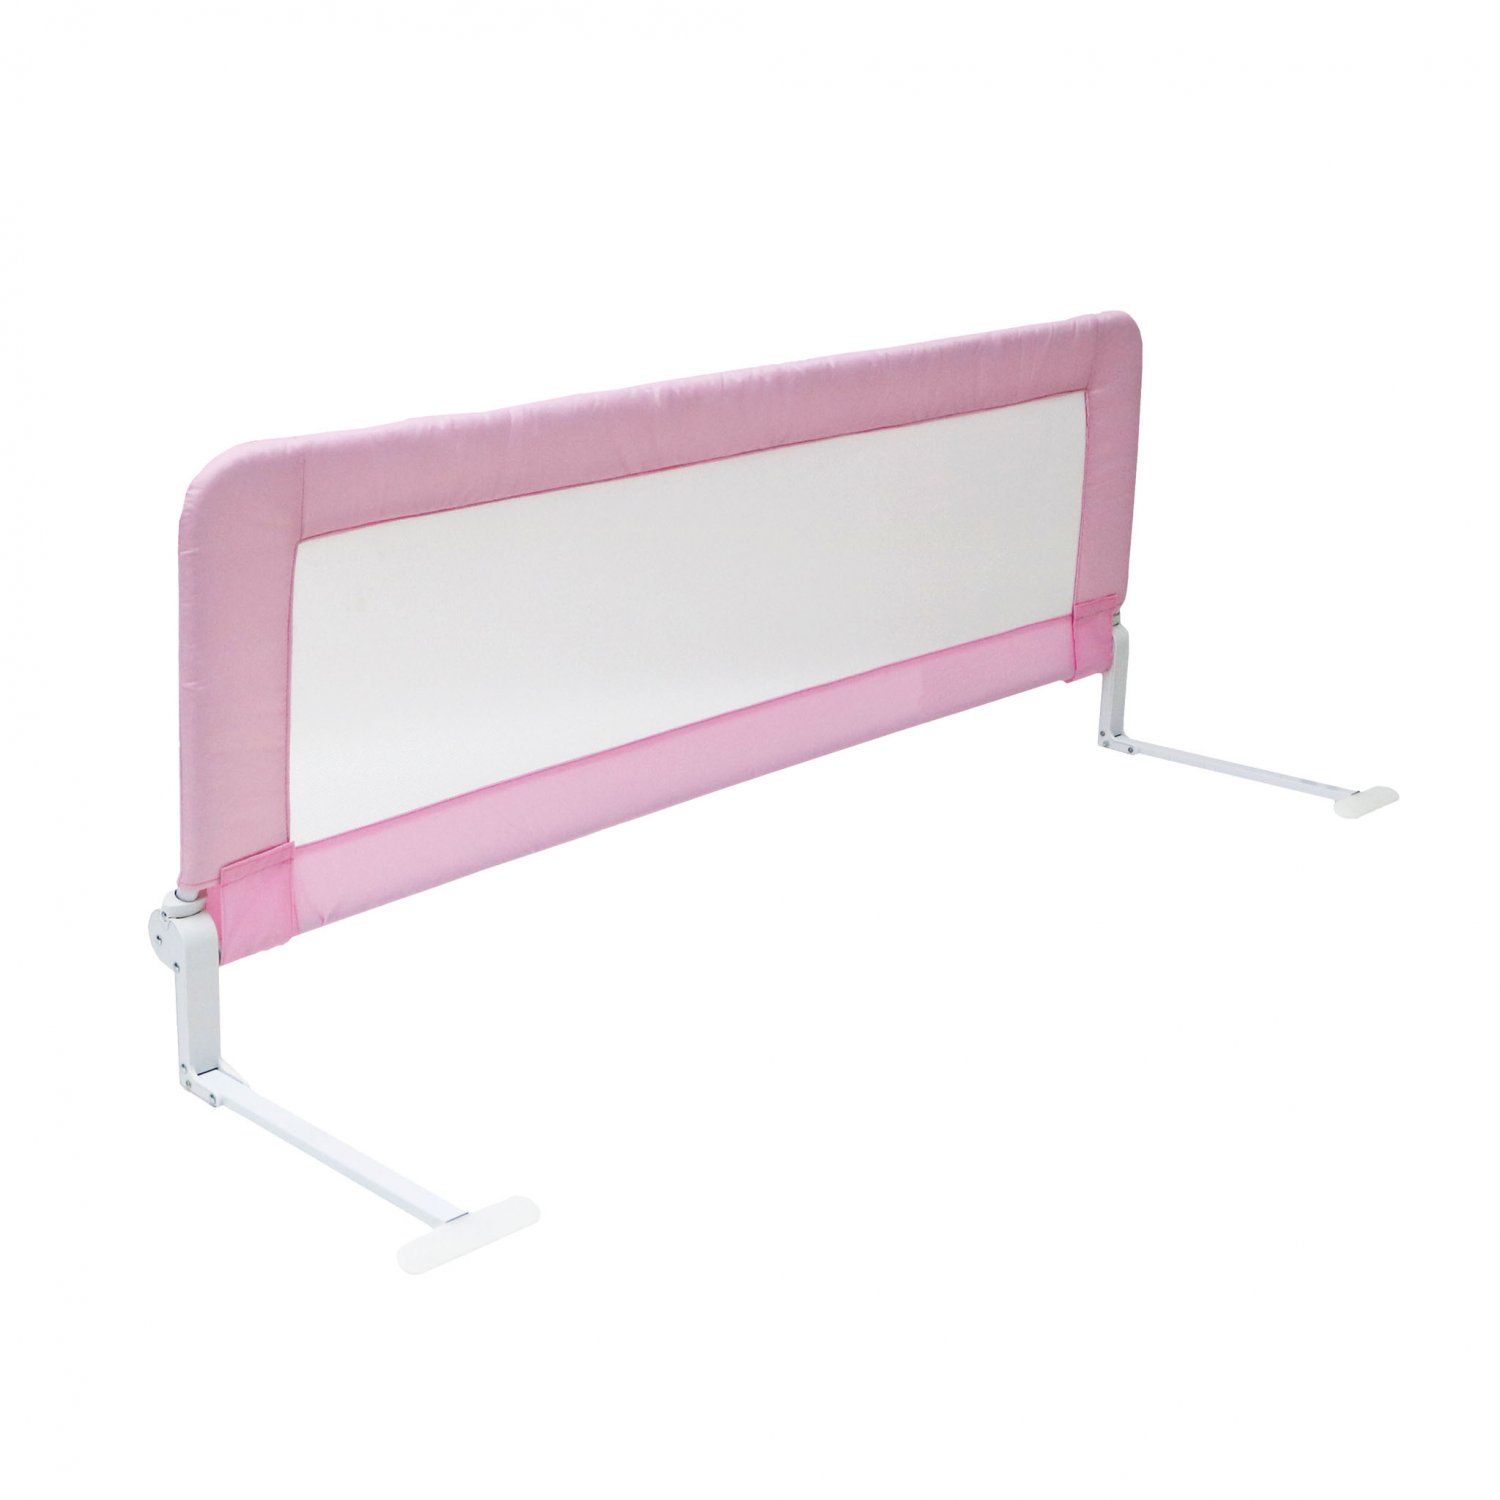 150cm Pink Baby Child Toddler Bed Rail Safety Protection Guard